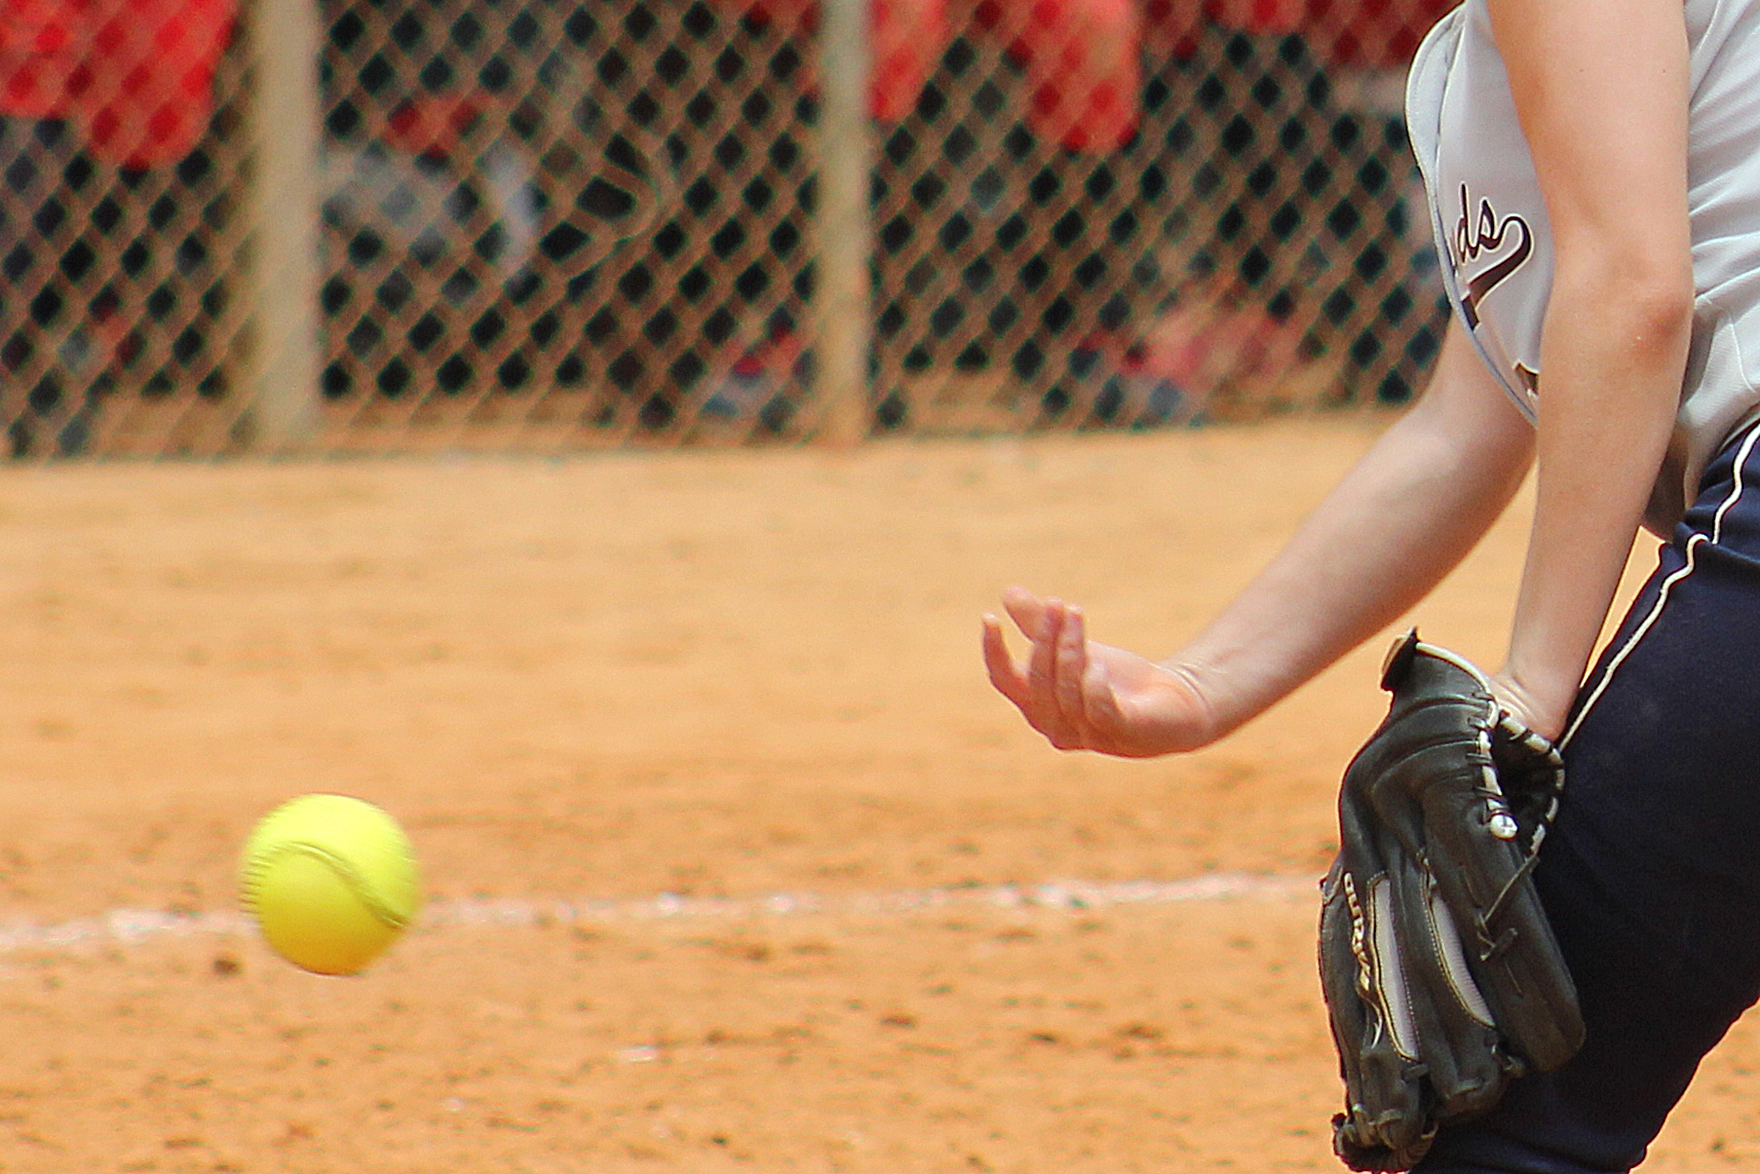 A softball is pitched